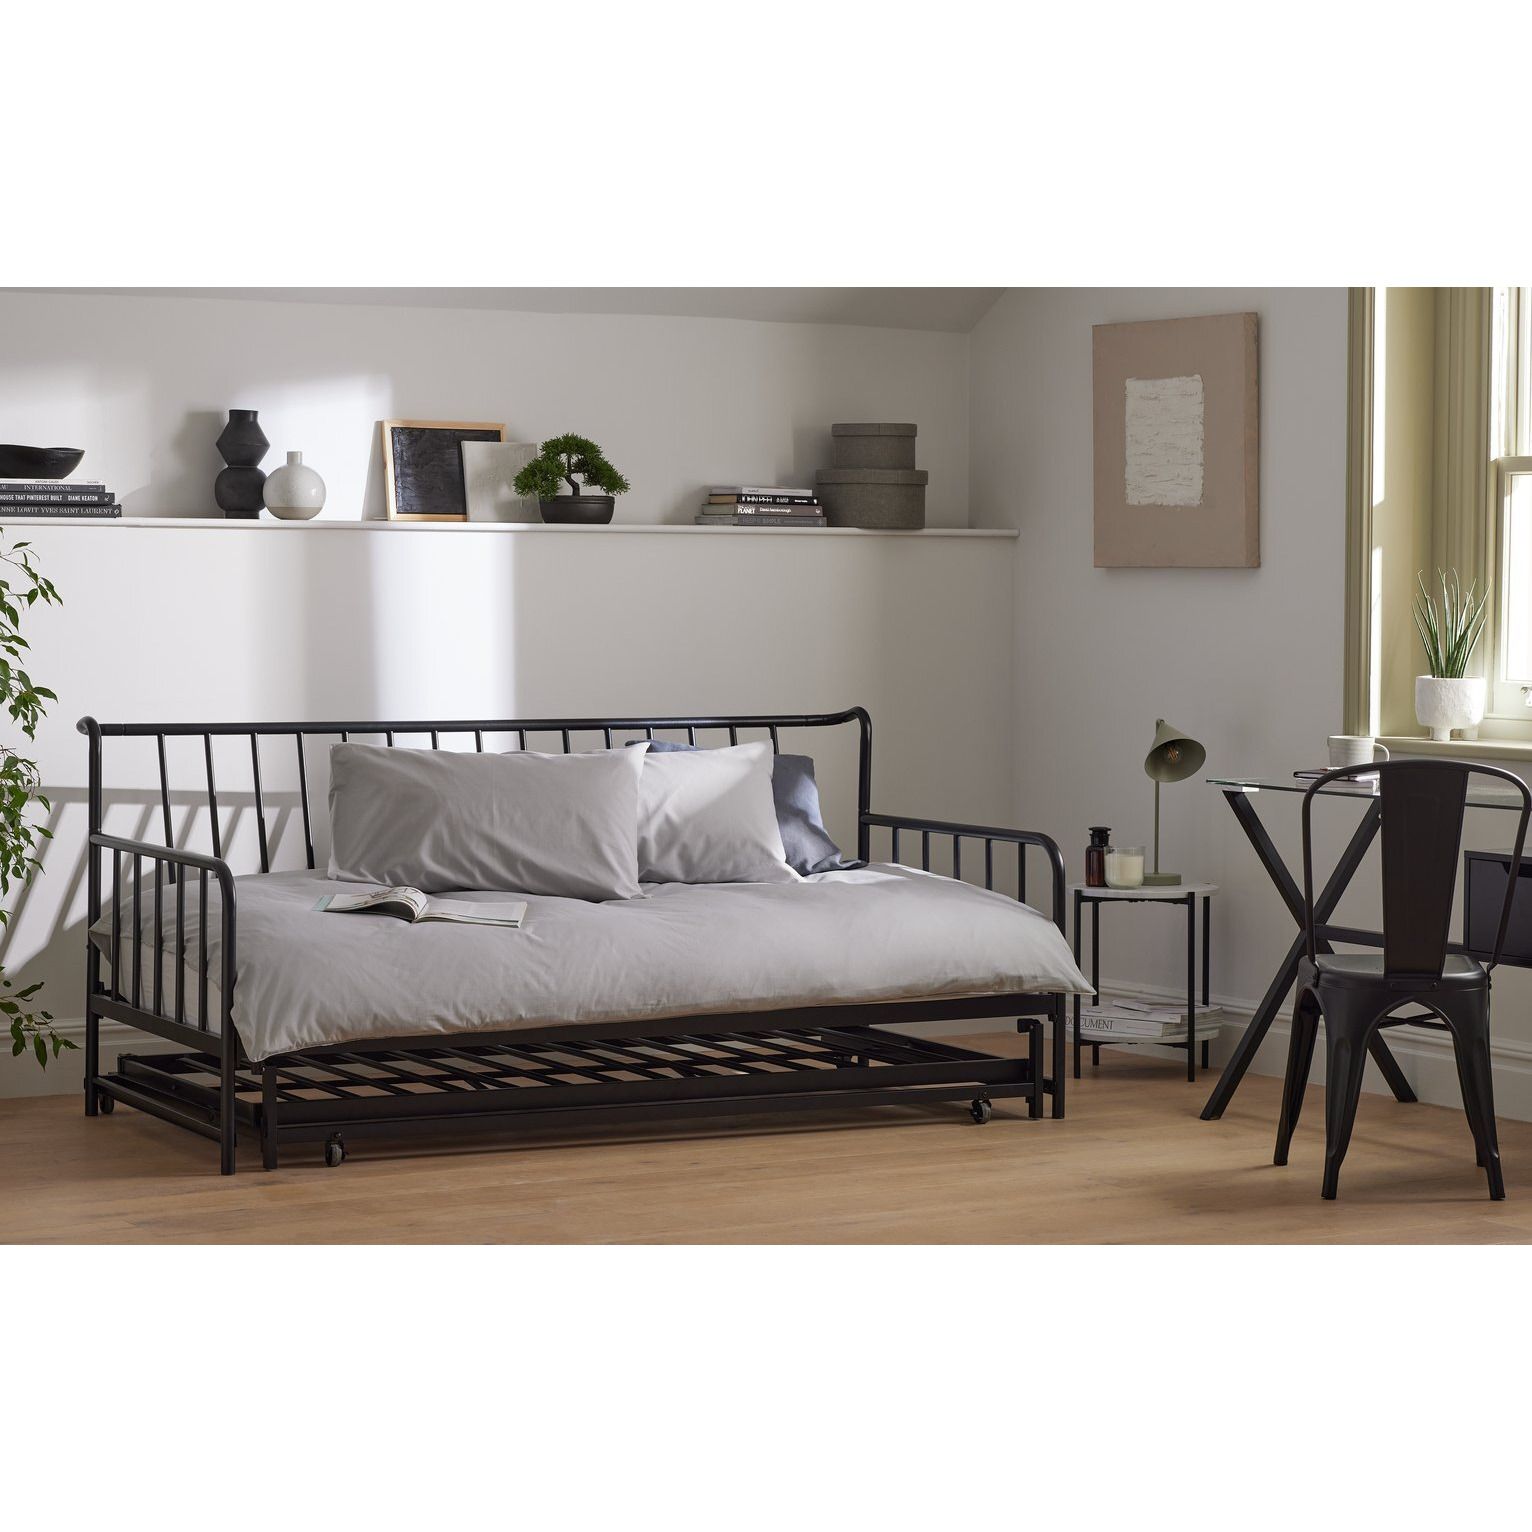 Habitat Kanso Metal Guest Bed with Trundle - Black - image 1